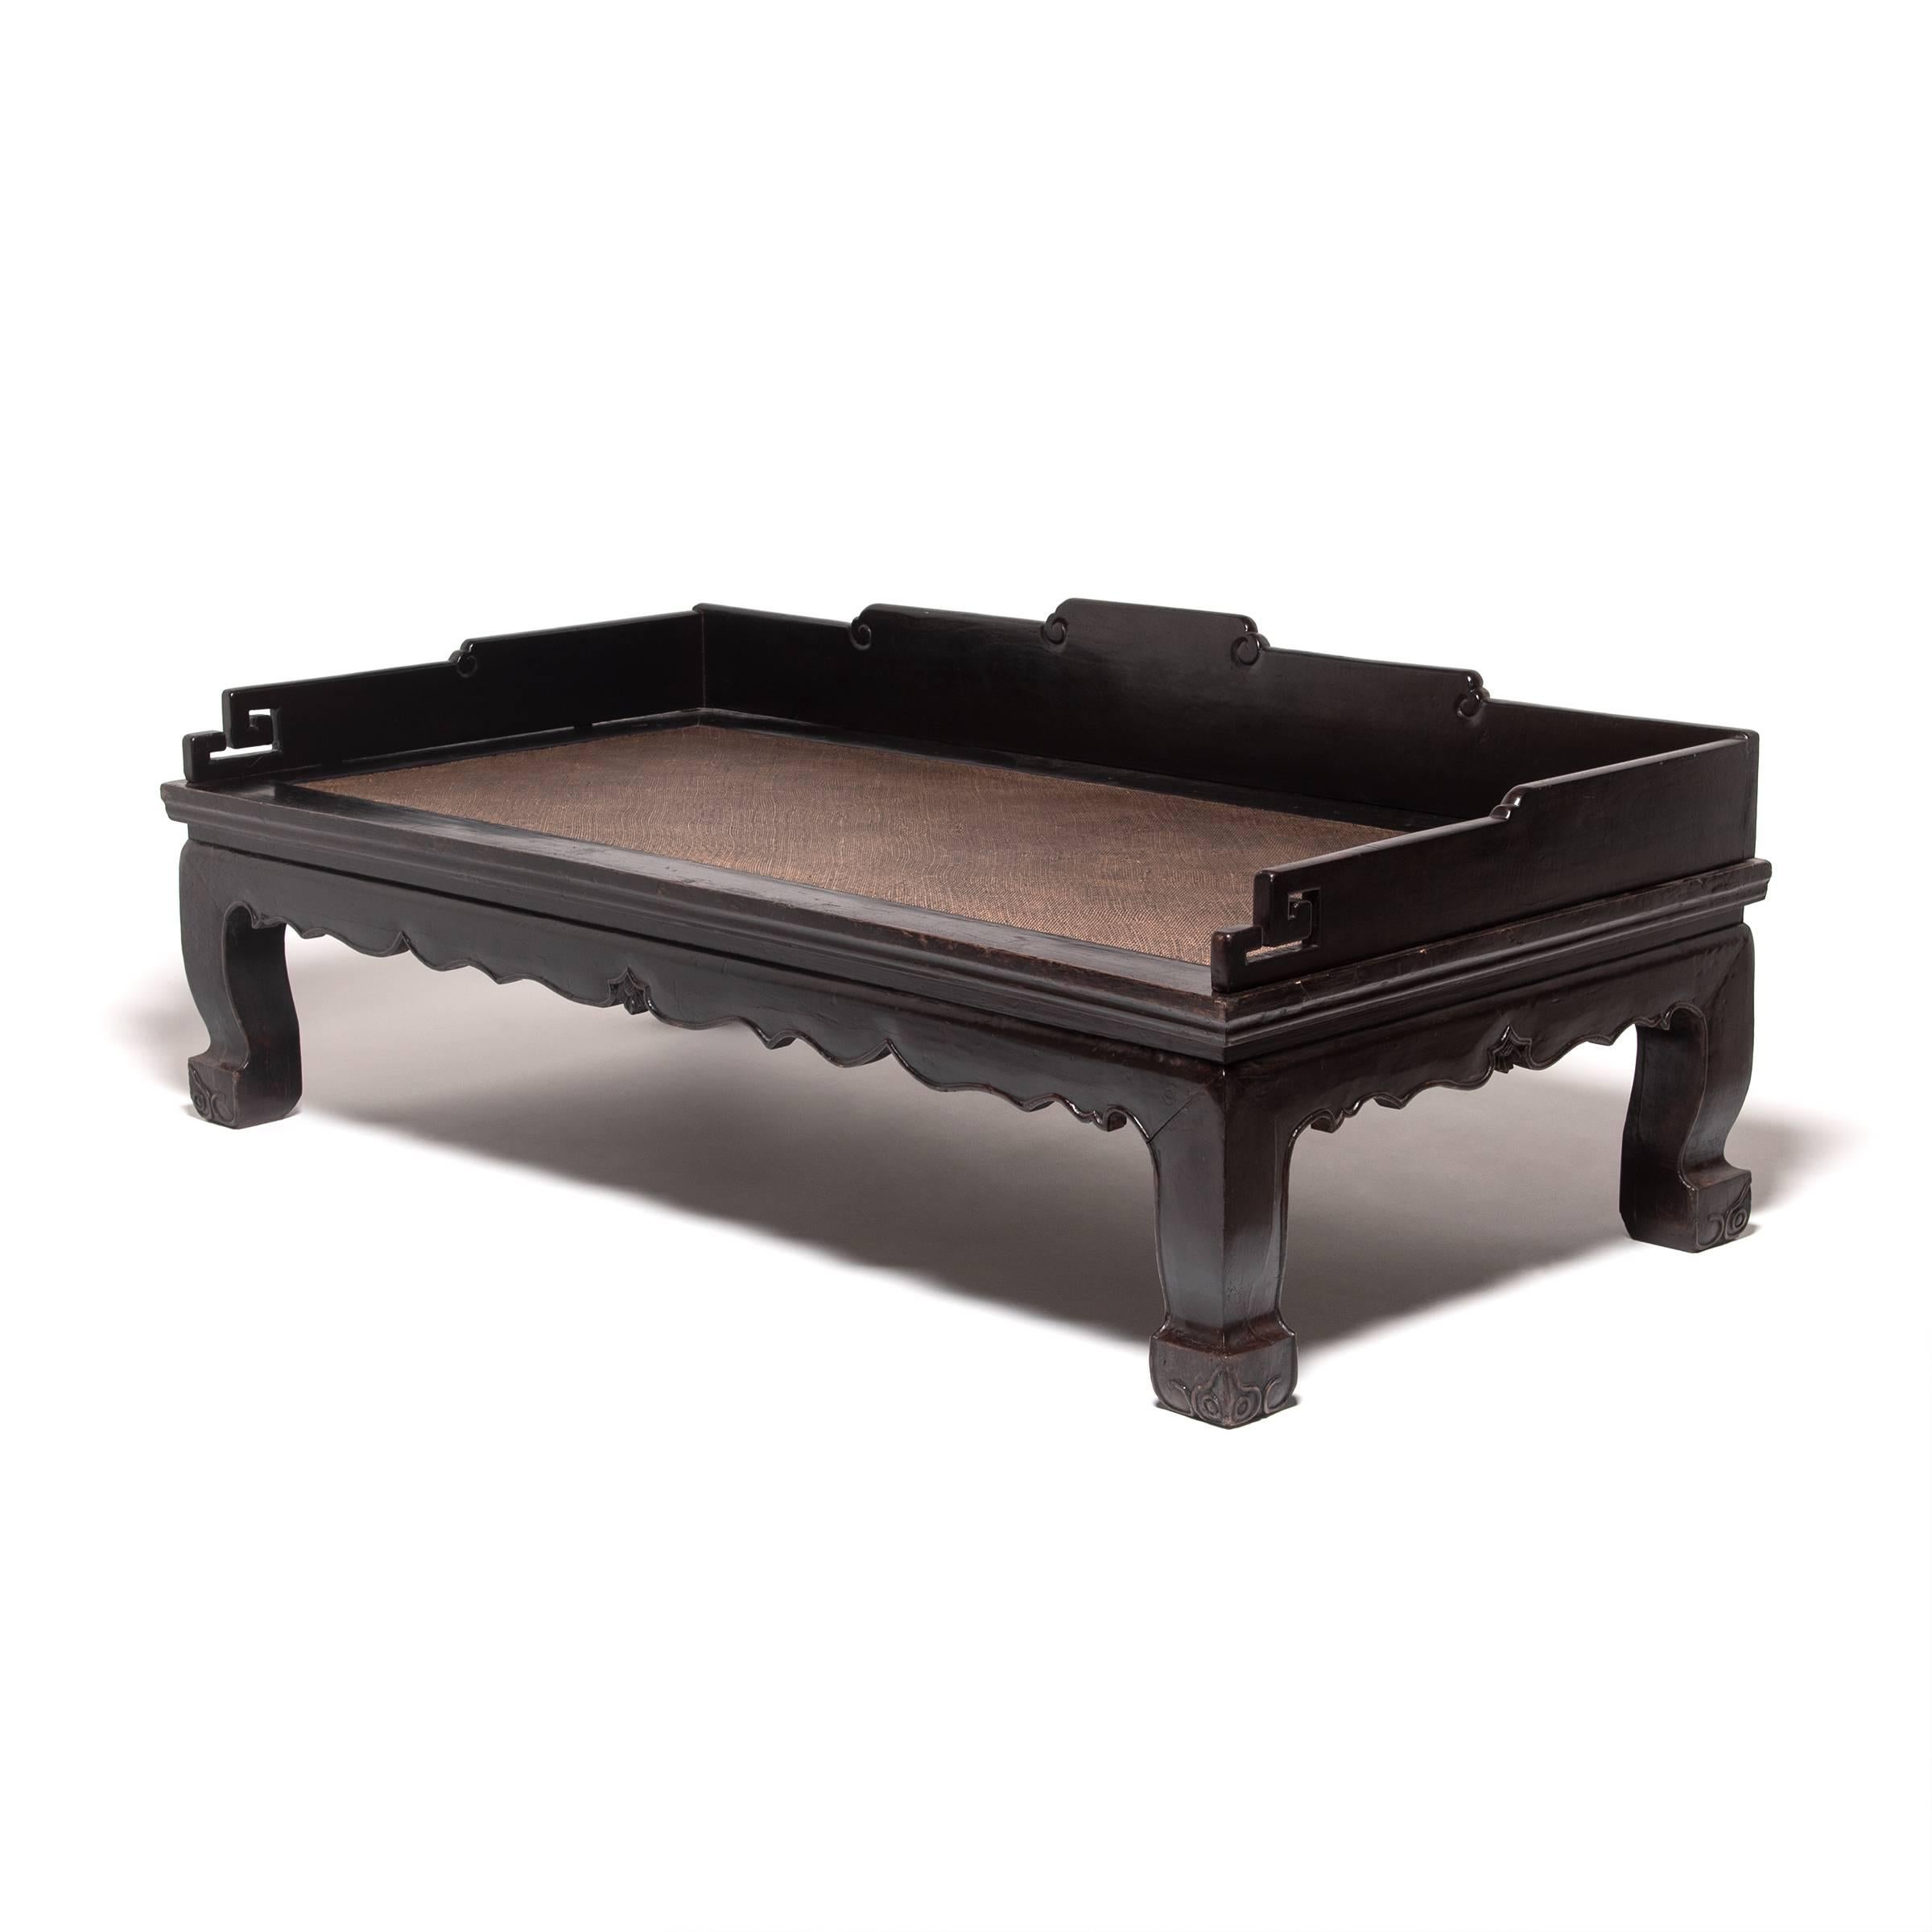 For much of Chinese history, it was customary to sit on mats on the ground, and it was only relatively recently that people began to use raised seating. The louhan bed is a piece of furniture that evolved from these traditions. A uniquely Chinese